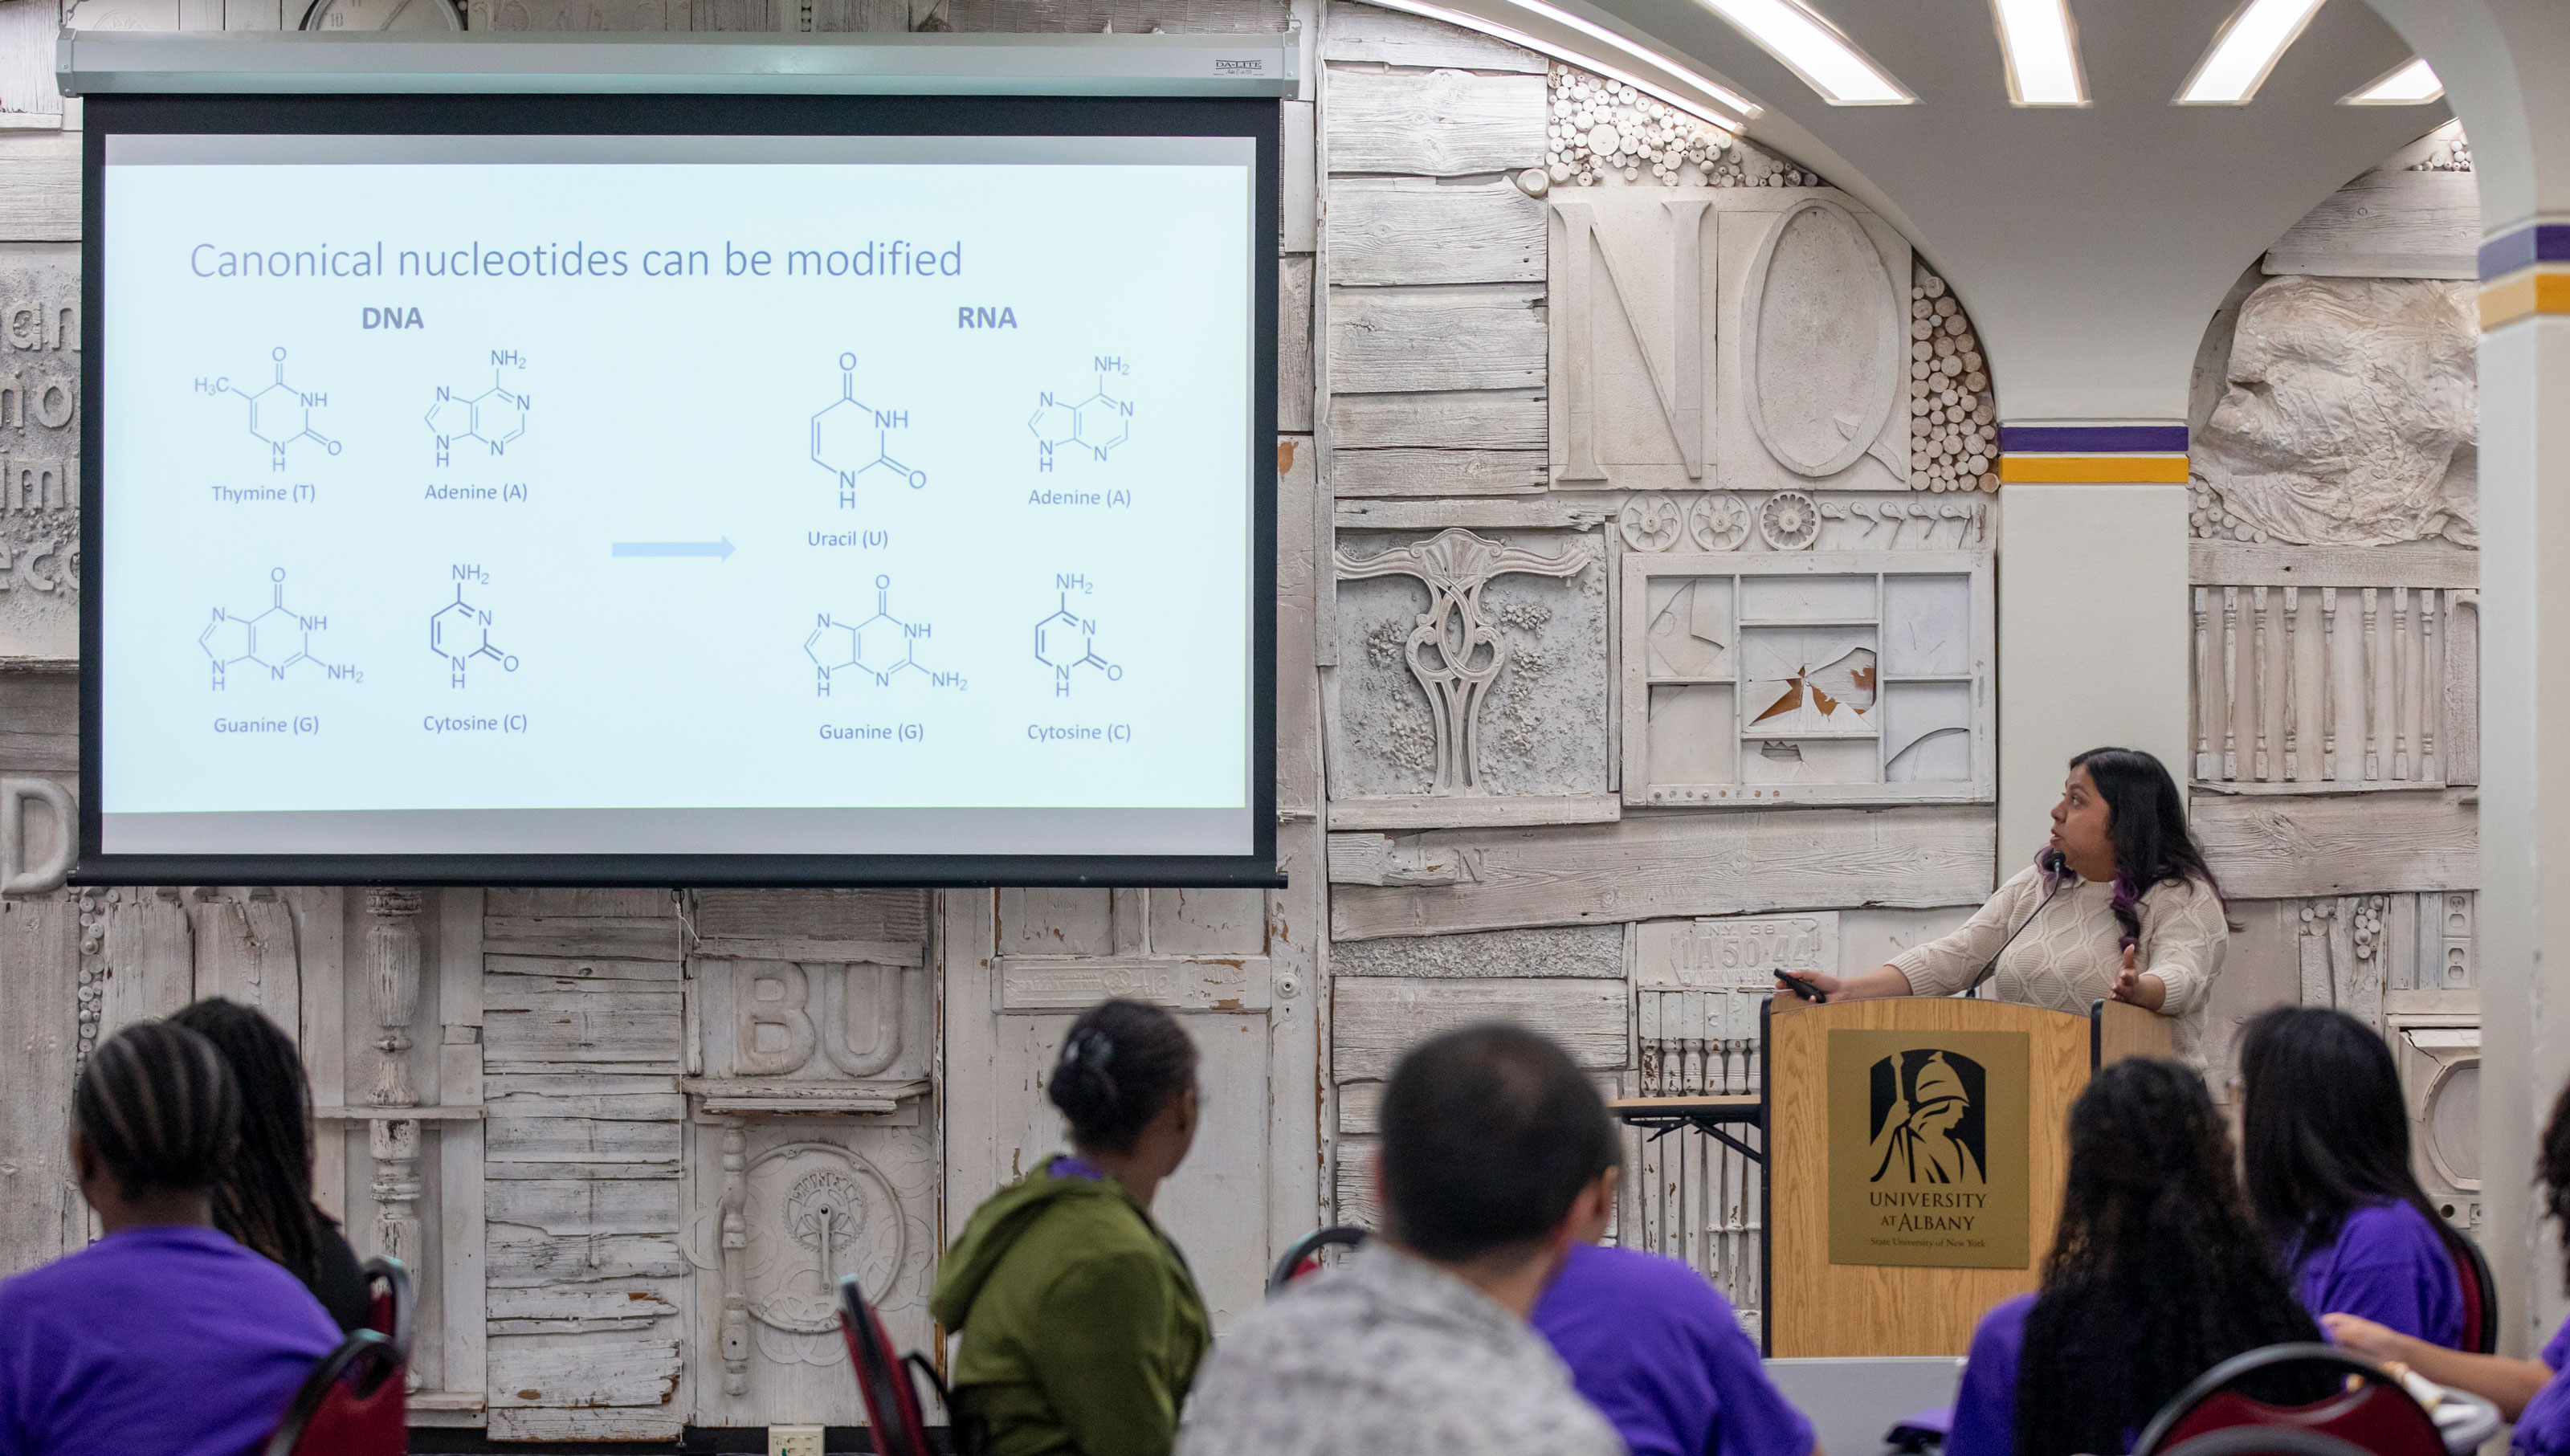 Health disparities doctoral fellow Esperanza Rosas presents a slide titled, "Canonical nucleotides can be modified," with images of RNA and DNA compounds.